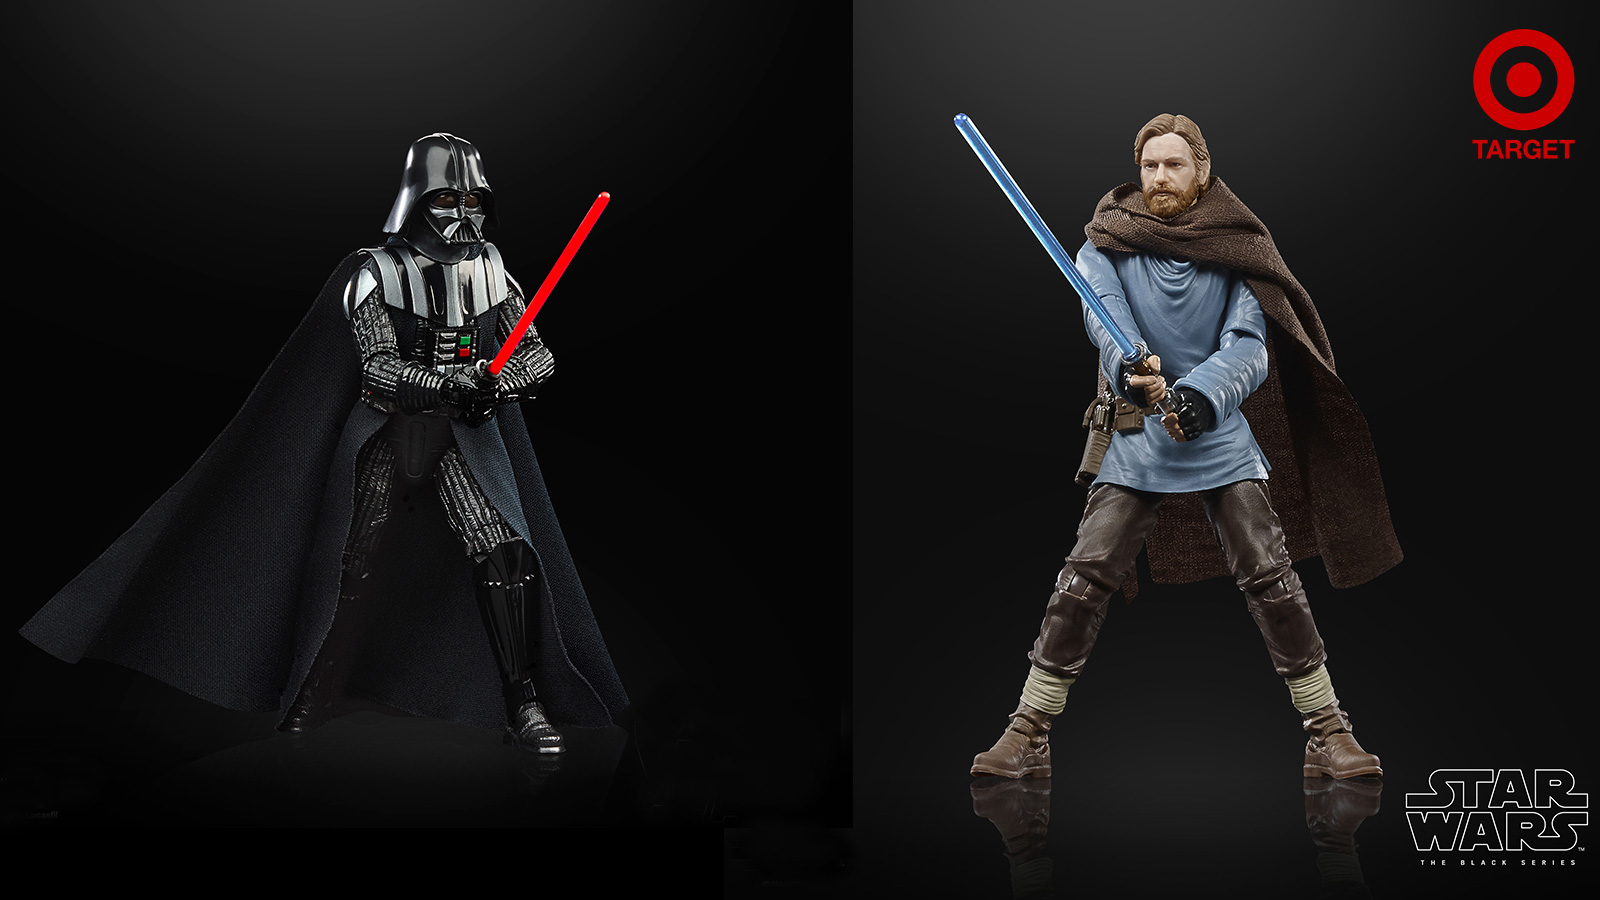 Preorder Now - TBS 6-Inch Darth Vader And Target Exclusive Ben Kenobi (Tibidon Station) FIgures - With Links